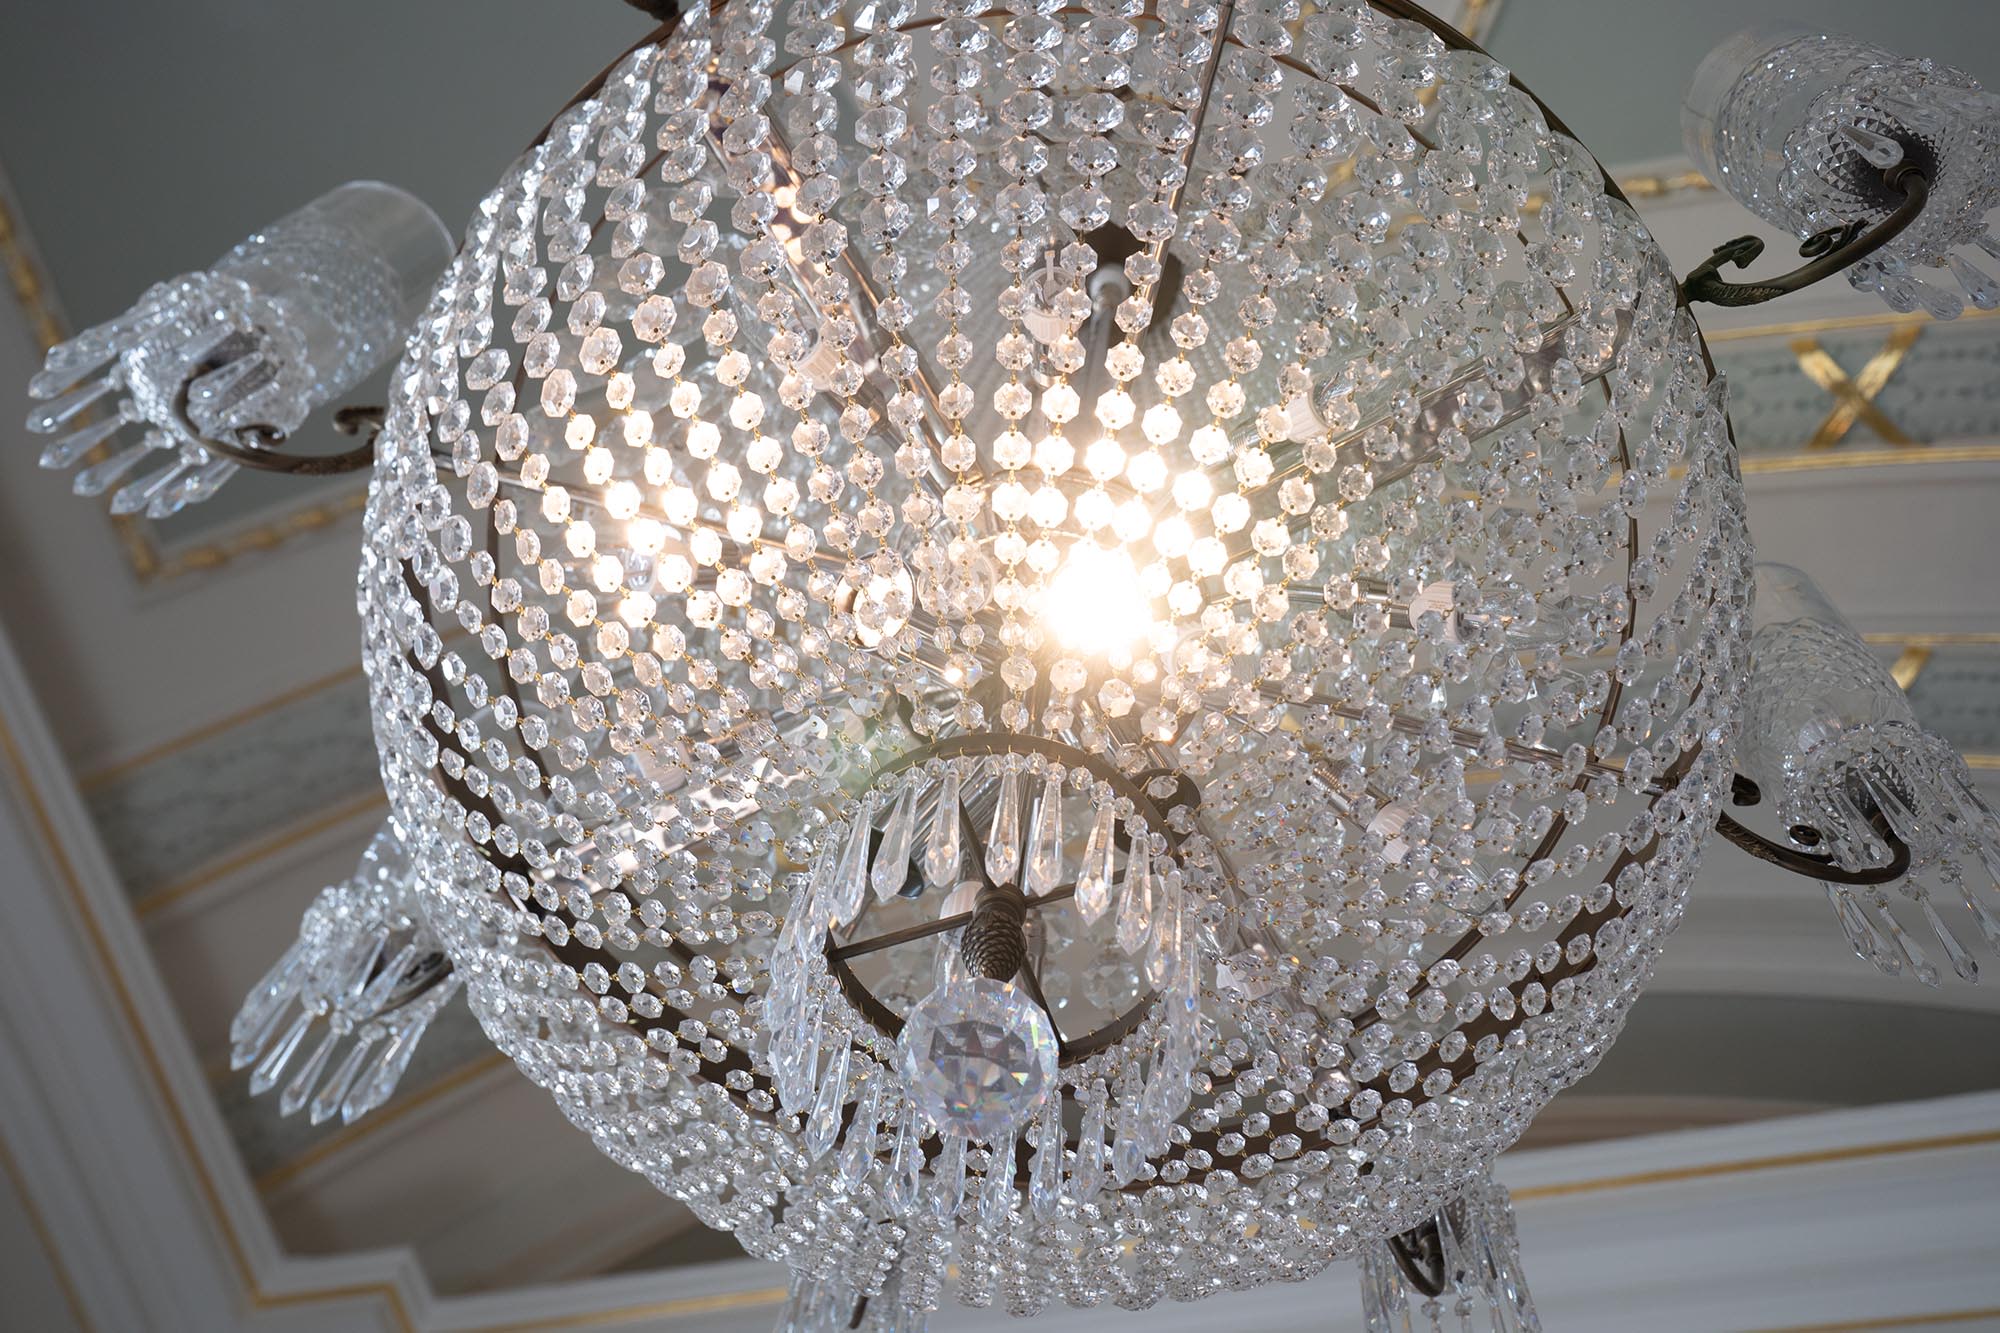 Grand Saloon - Chandelier close up